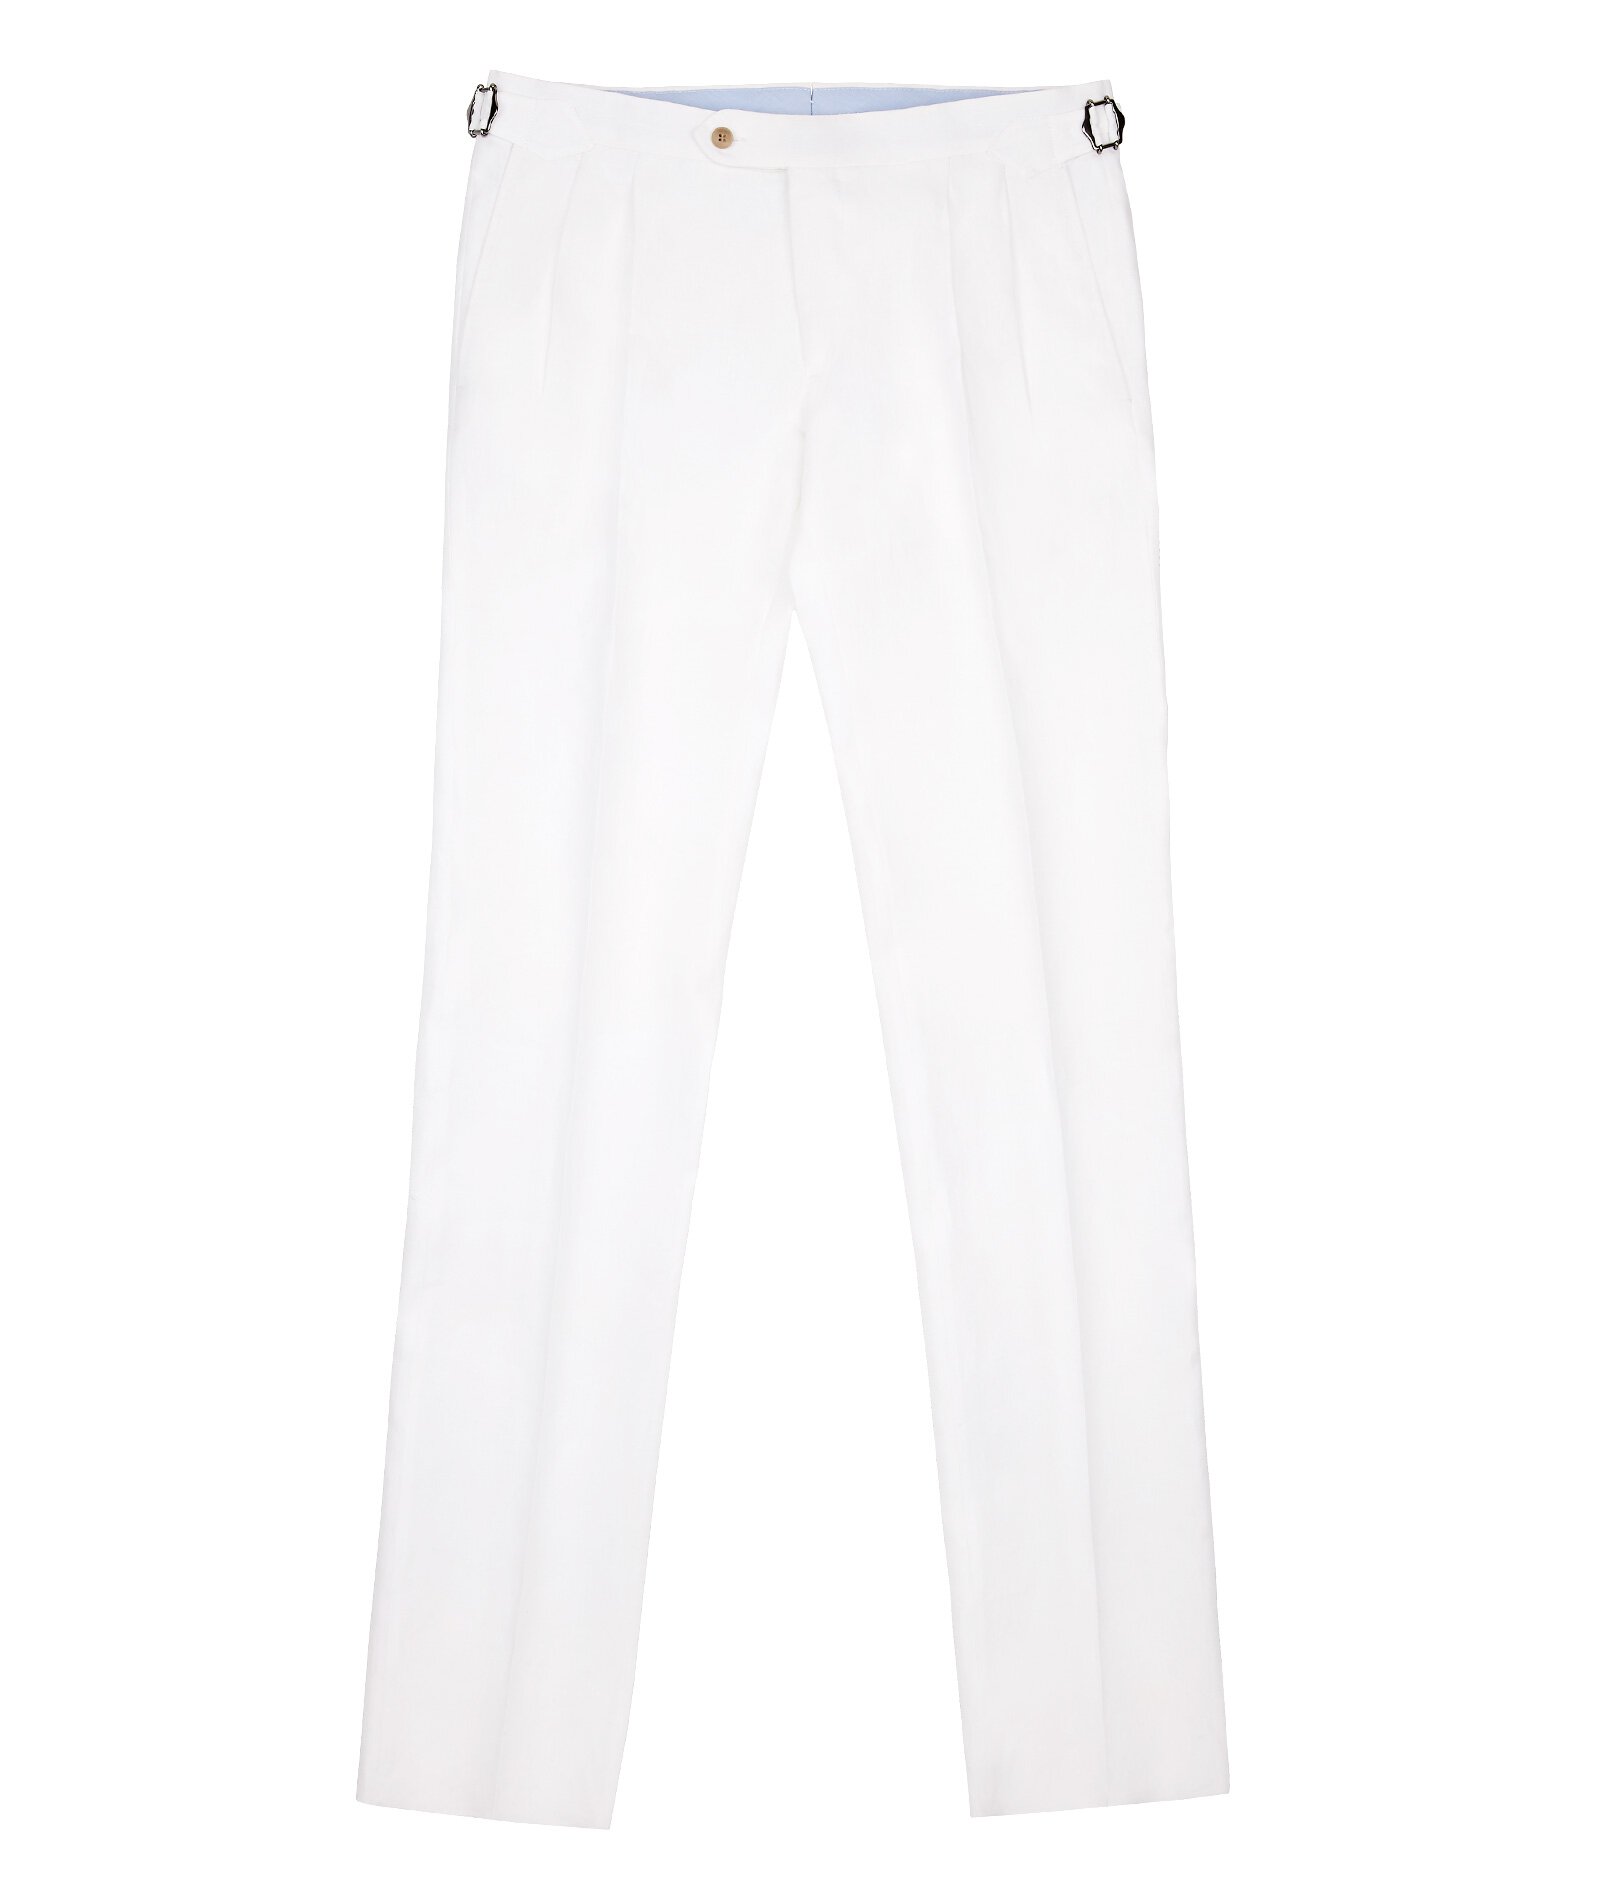 Solid White Linen Chinos